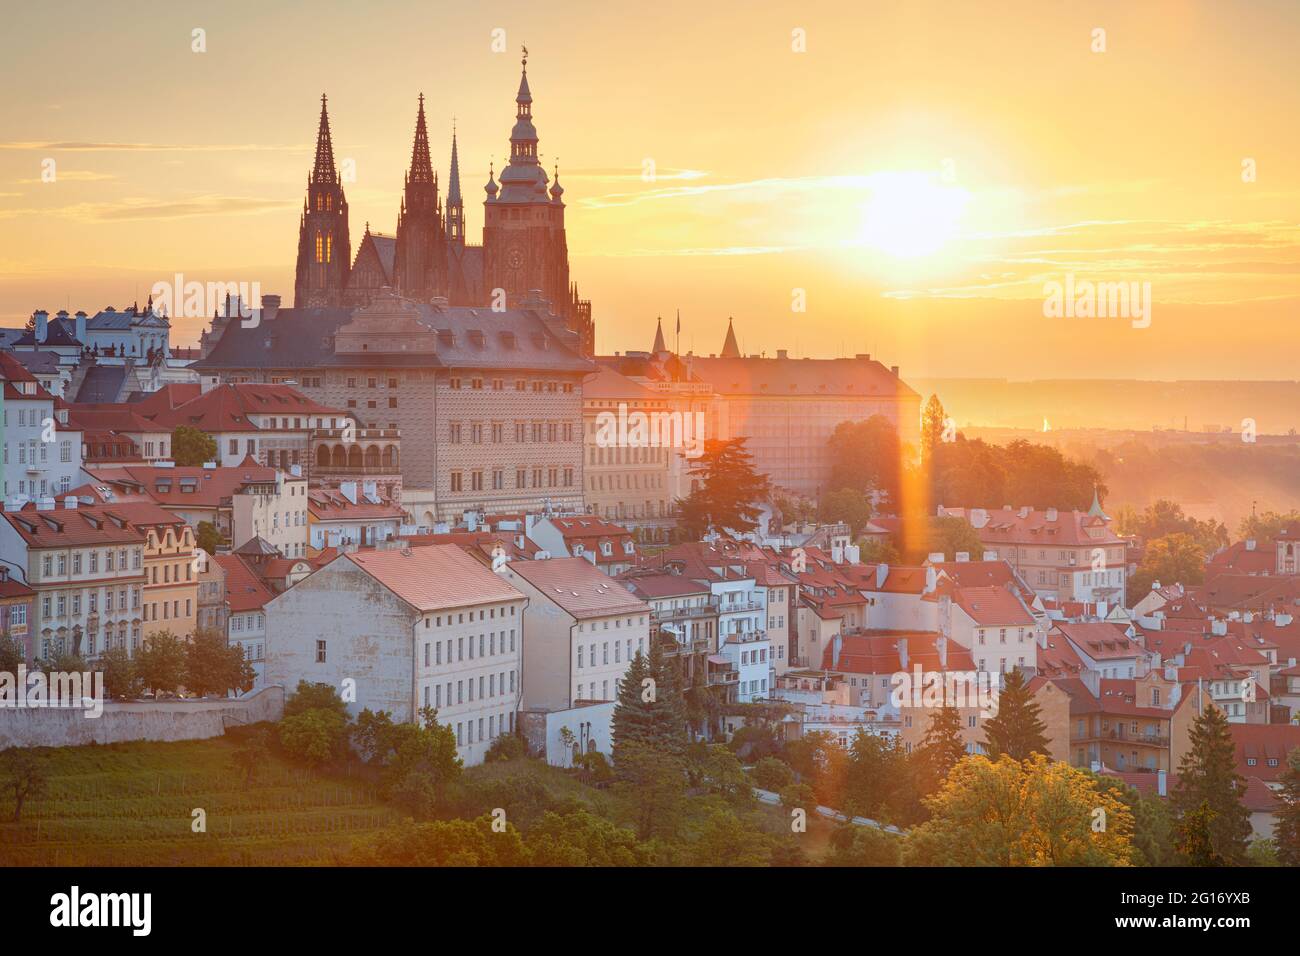 Prague Castle. Aerial cityscape image of Prague, capital city of  Czech Republic with St. Vitus Cathedral and Castle District during summer sunrise. Stock Photo